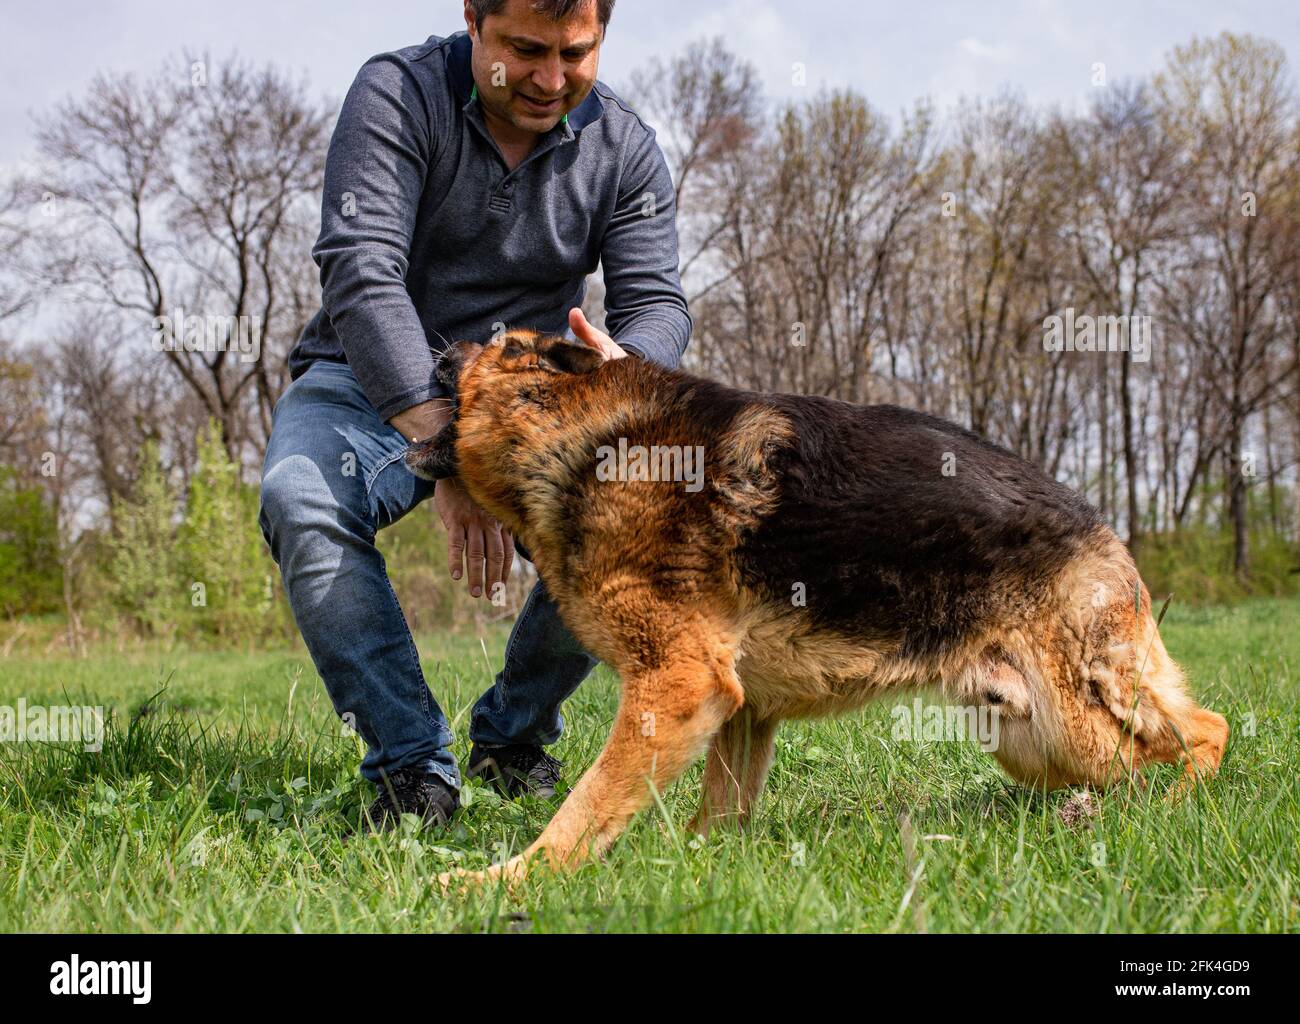 An adult male is being attacked by a German Shepherd as part of a play on a green grass lawn during spring time. Stock Photo